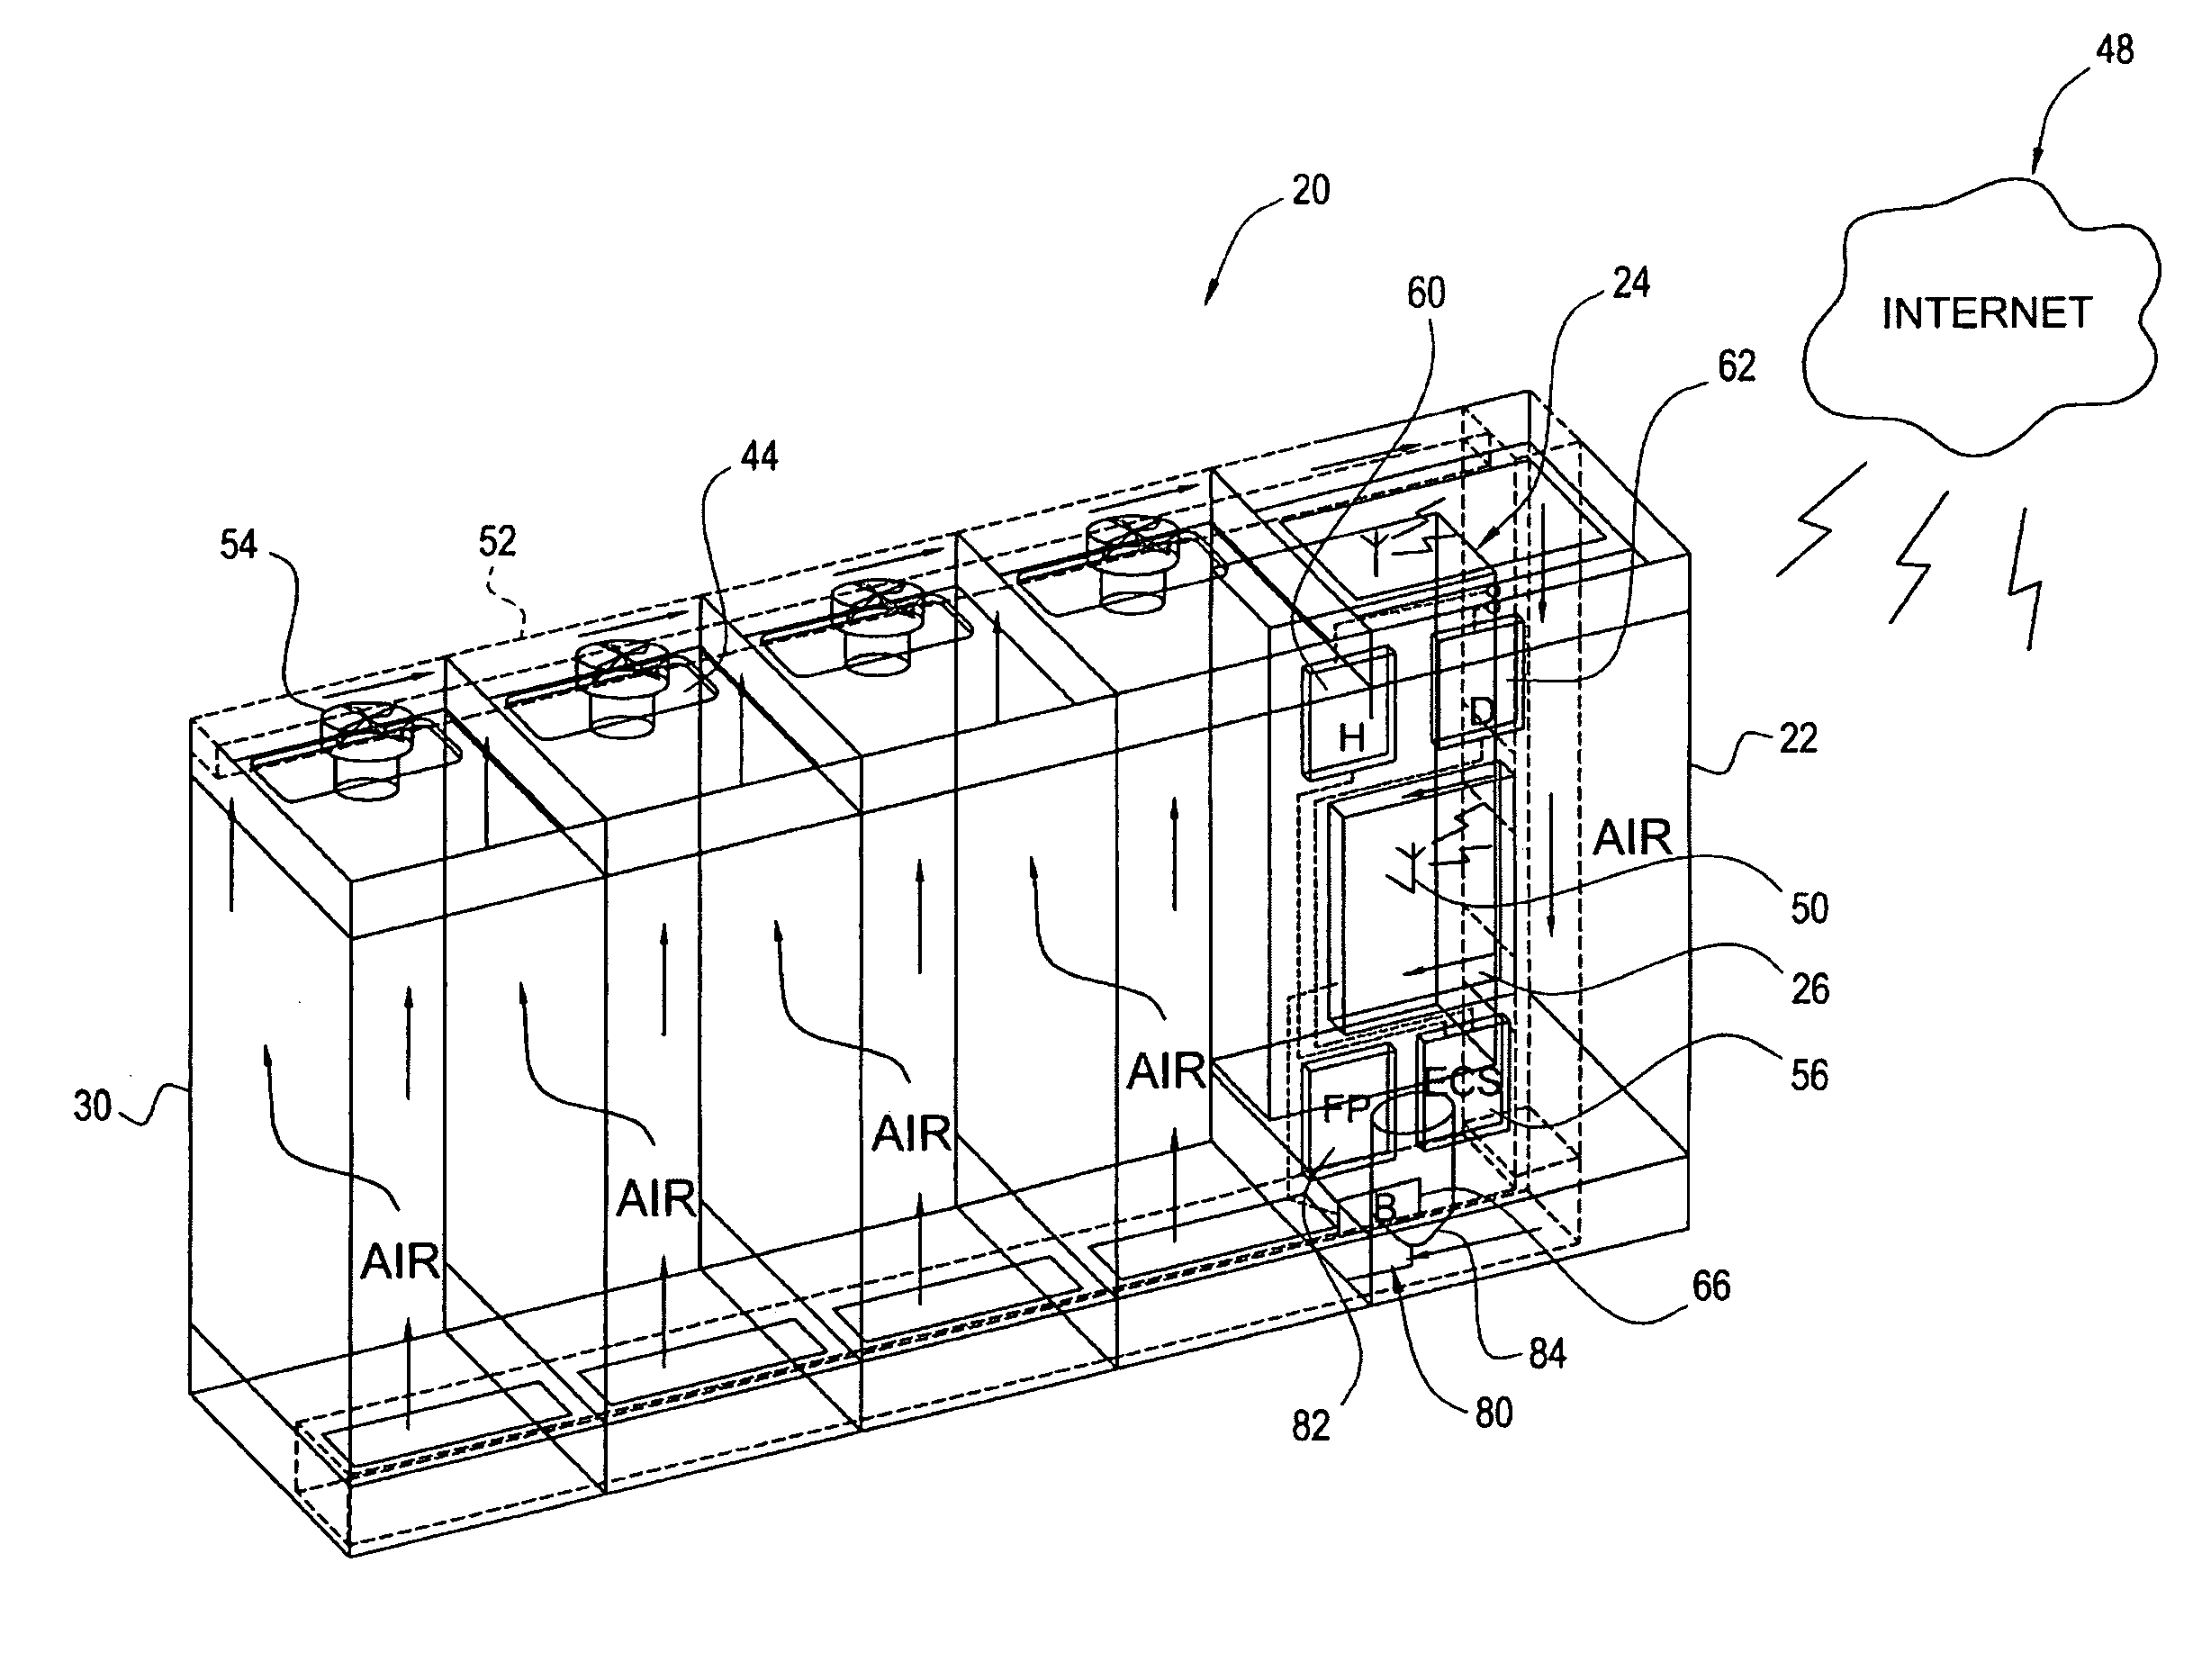 Closed data center containment system and associated methods